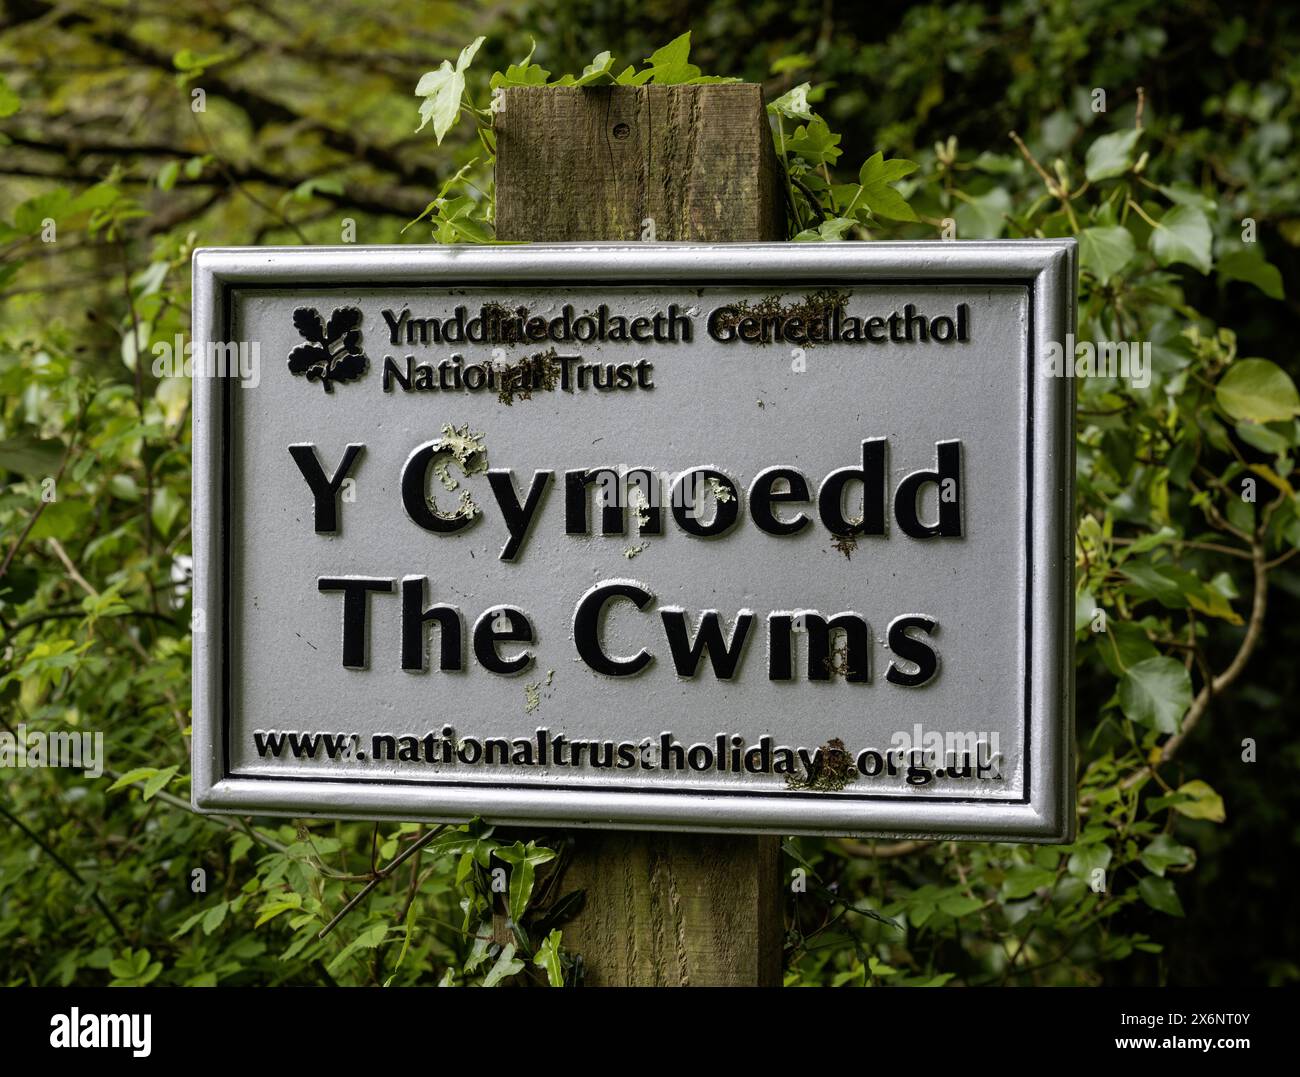 Colby Woodland Garden, Pembrokeshire, South Wales, Wales, UK - National Trust sign for The Cwms cottage Stock Photo